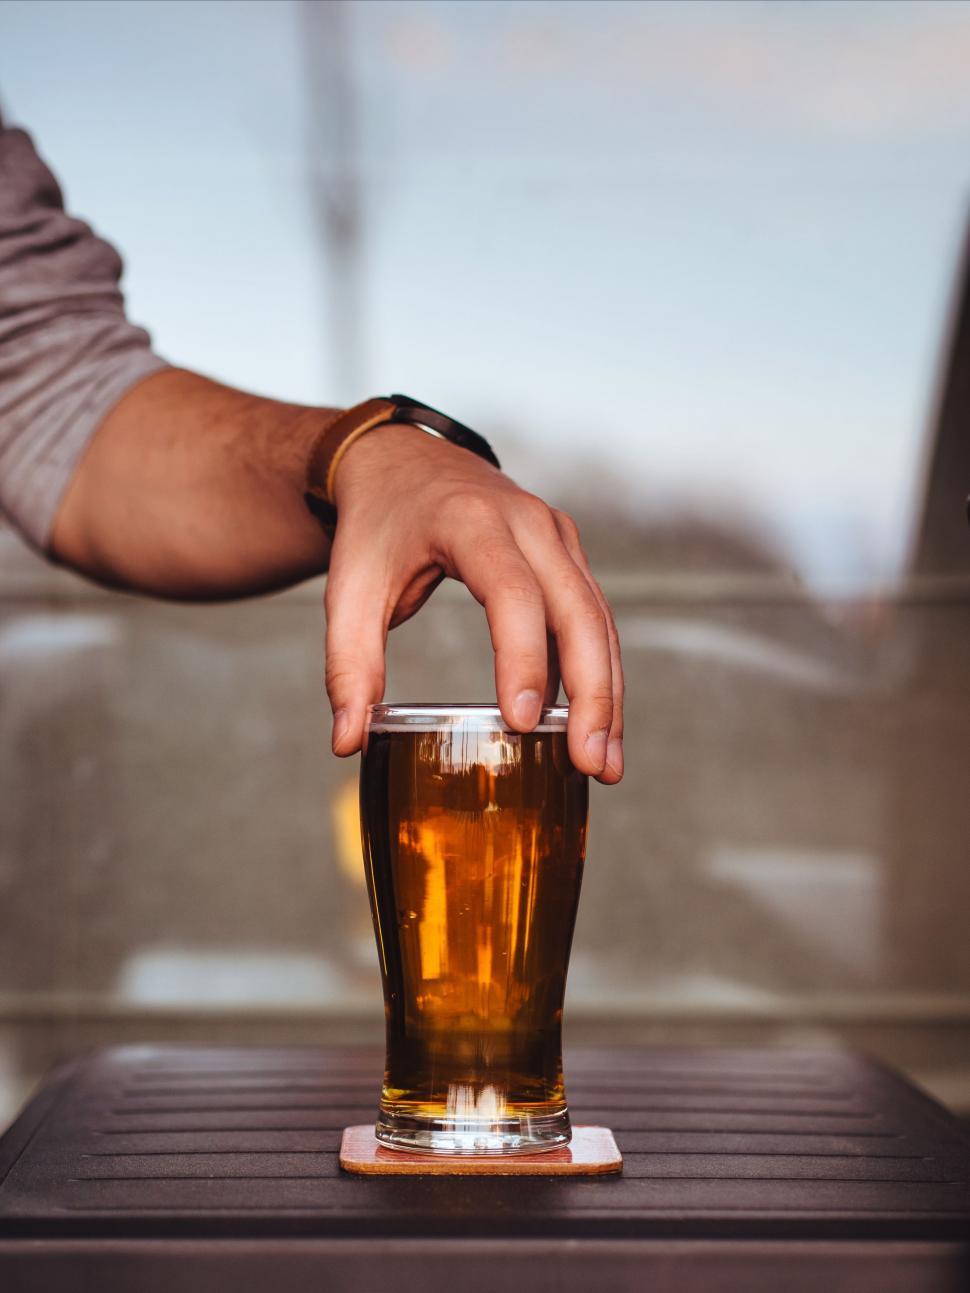 Free Image of Beer Glass And Hand  